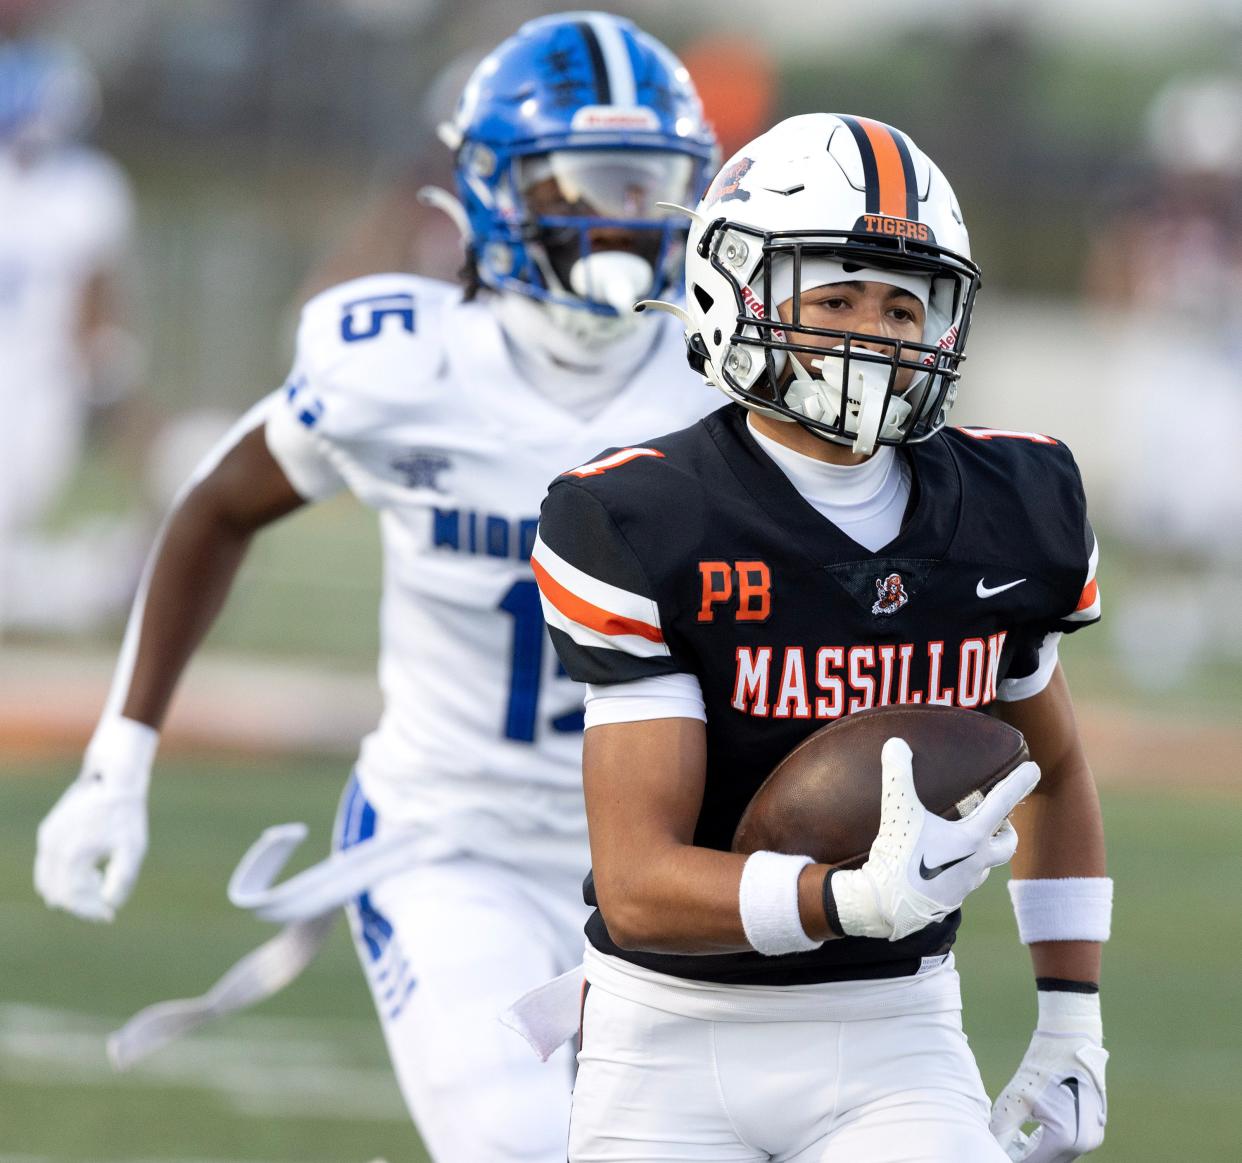 Massillon's Braylyn Toles caught two TD passes Friday.